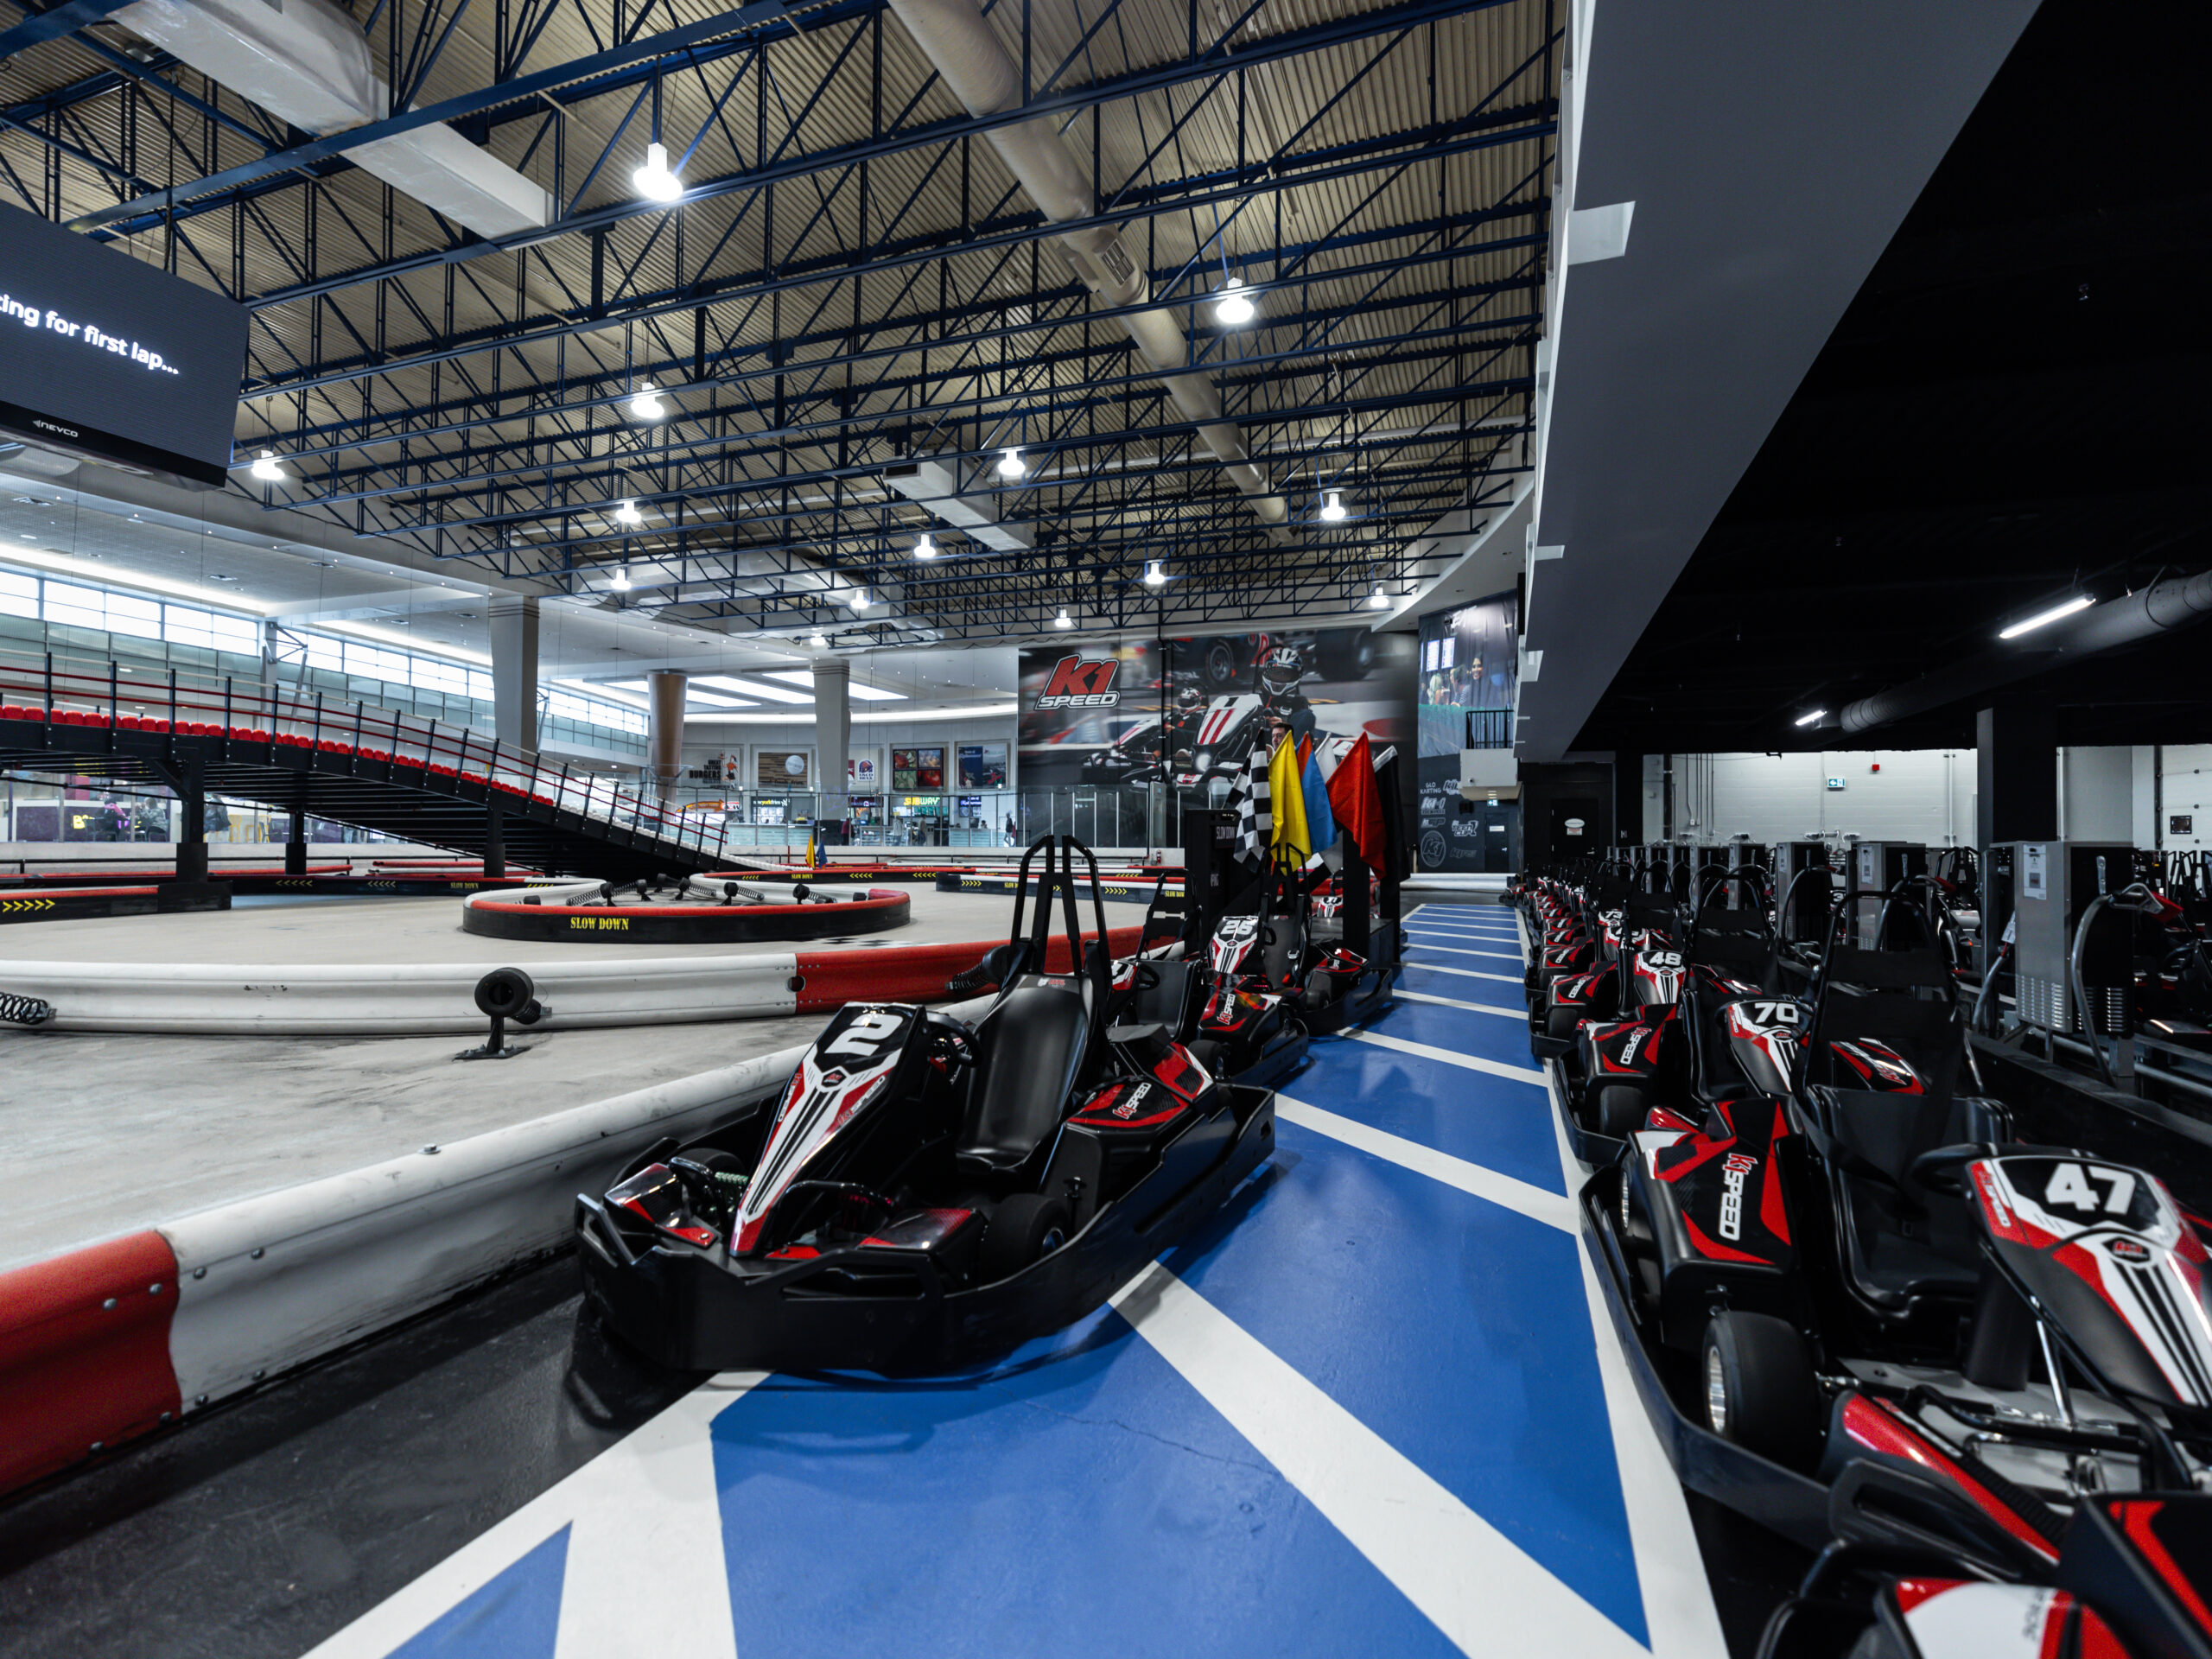 Mastering the Champions Mindset at K1 Speed